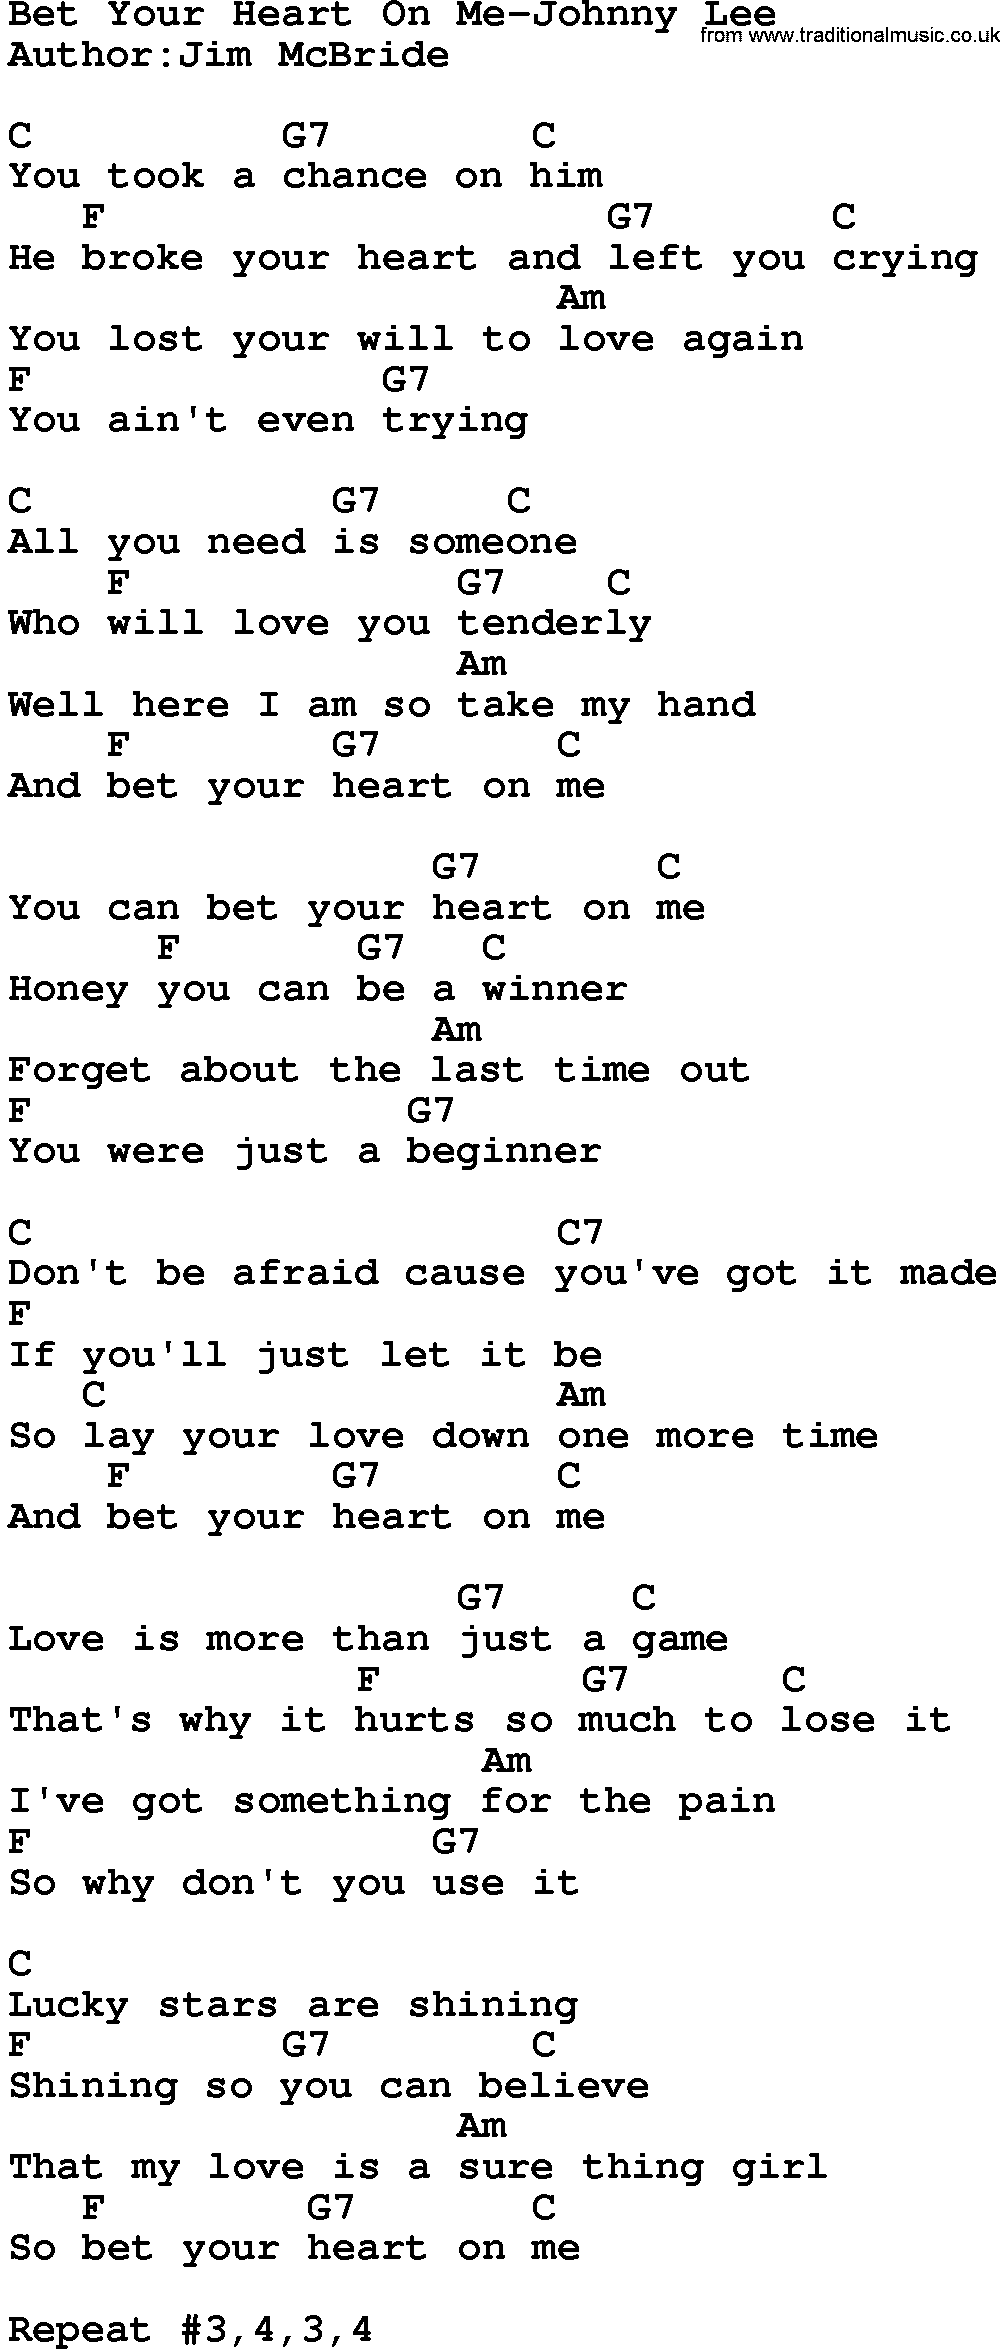 Country music song: Bet Your Heart On Me-Johnny Lee lyrics and chords